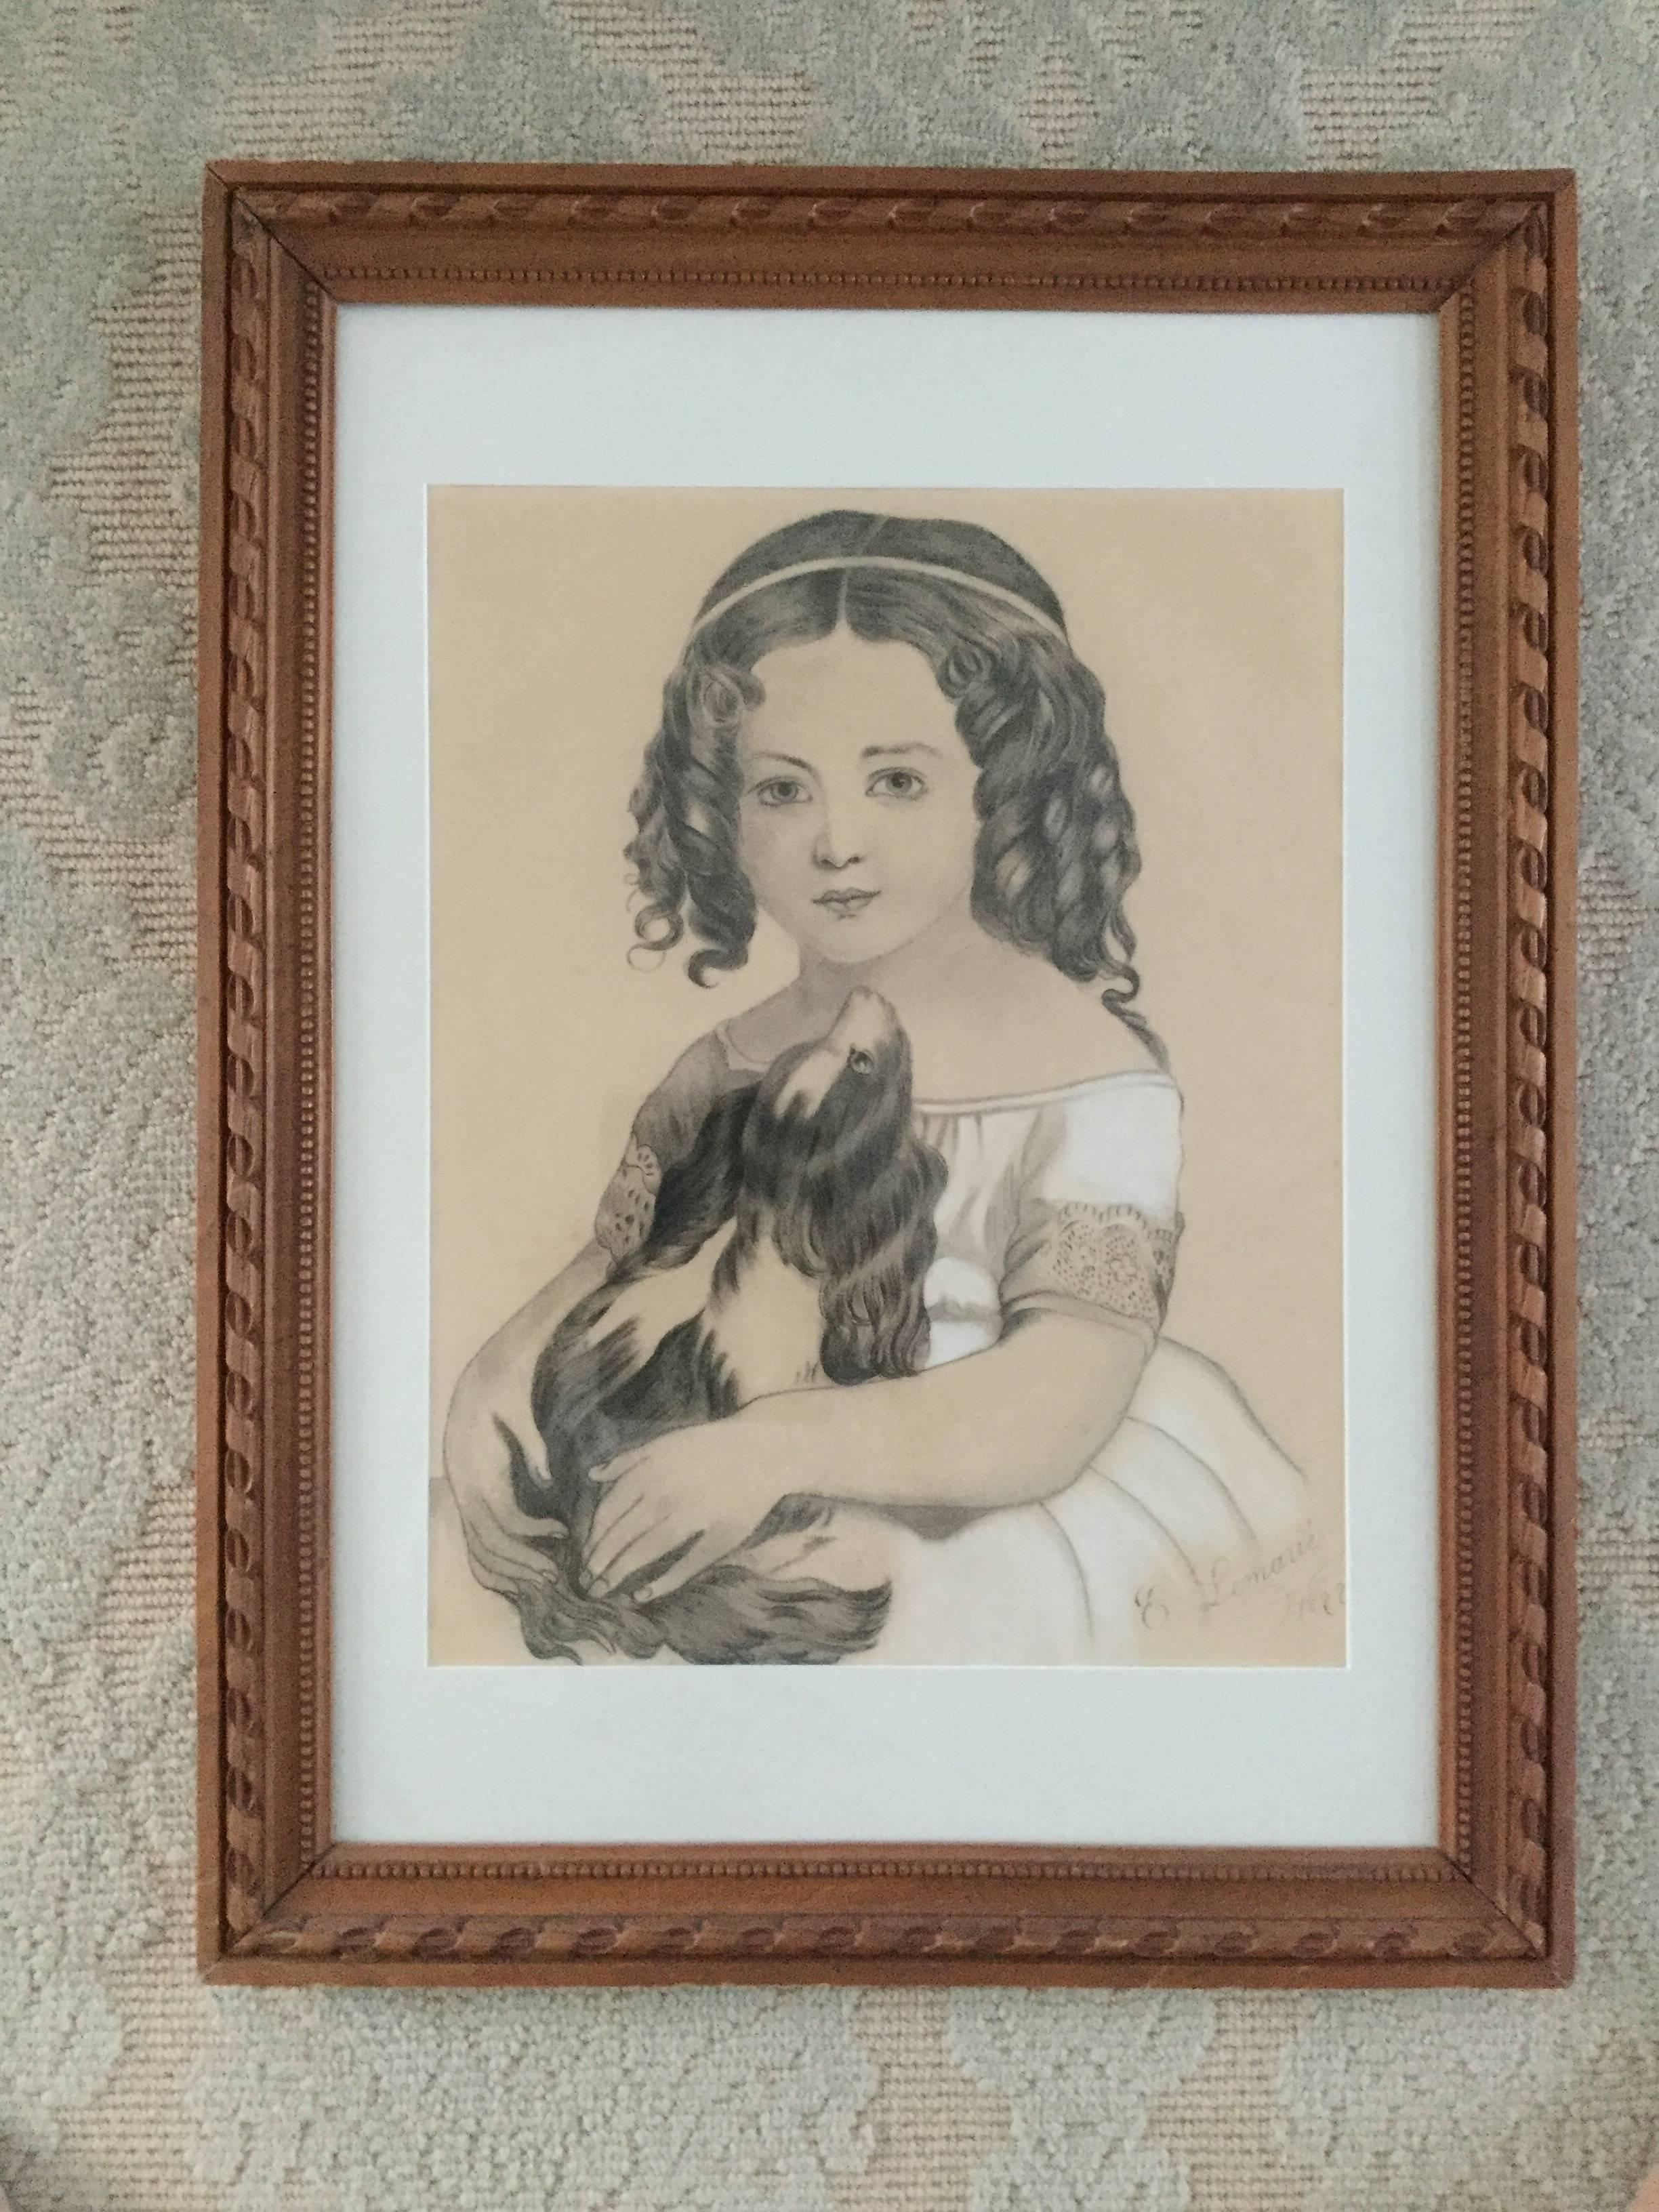 A beautifully rendered 19th century pencil and white chalk portrait of a young girl and her dog, signed E. Lemarié and dated 1897. Meticulous detail, especially the lace on the girl's sleeve and the sumptuous curls of her hair. The frame is in the